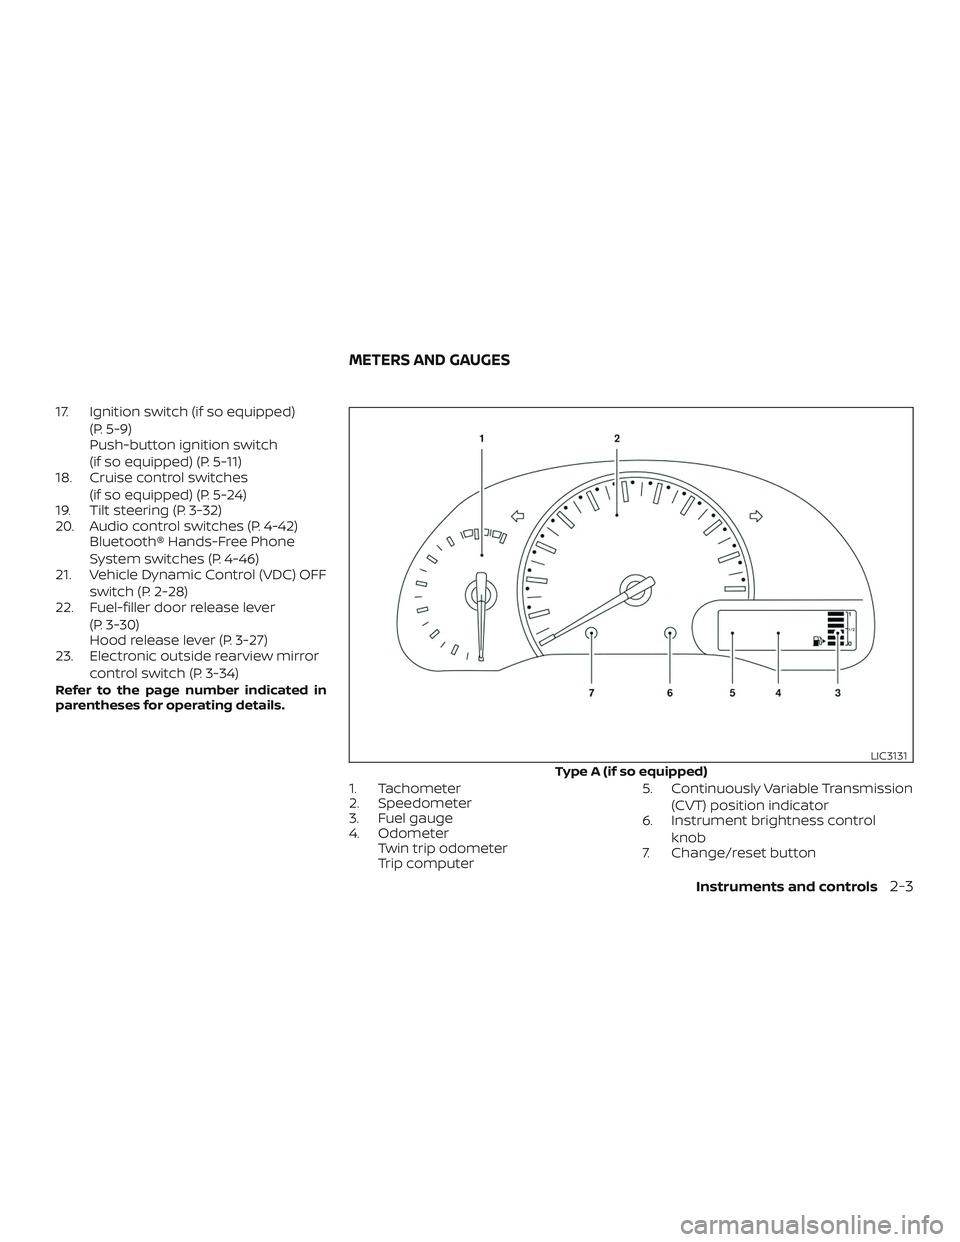 NISSAN VERSA 2019  Owners Manual 17. Ignition switch (if so equipped)(P. 5-9)
Push-button ignition switch
(if so equipped) (P. 5-11)
18. Cruise control switches
(if so equipped) (P. 5-24)
19. Tilt steering (P. 3-32)
20. Audio control